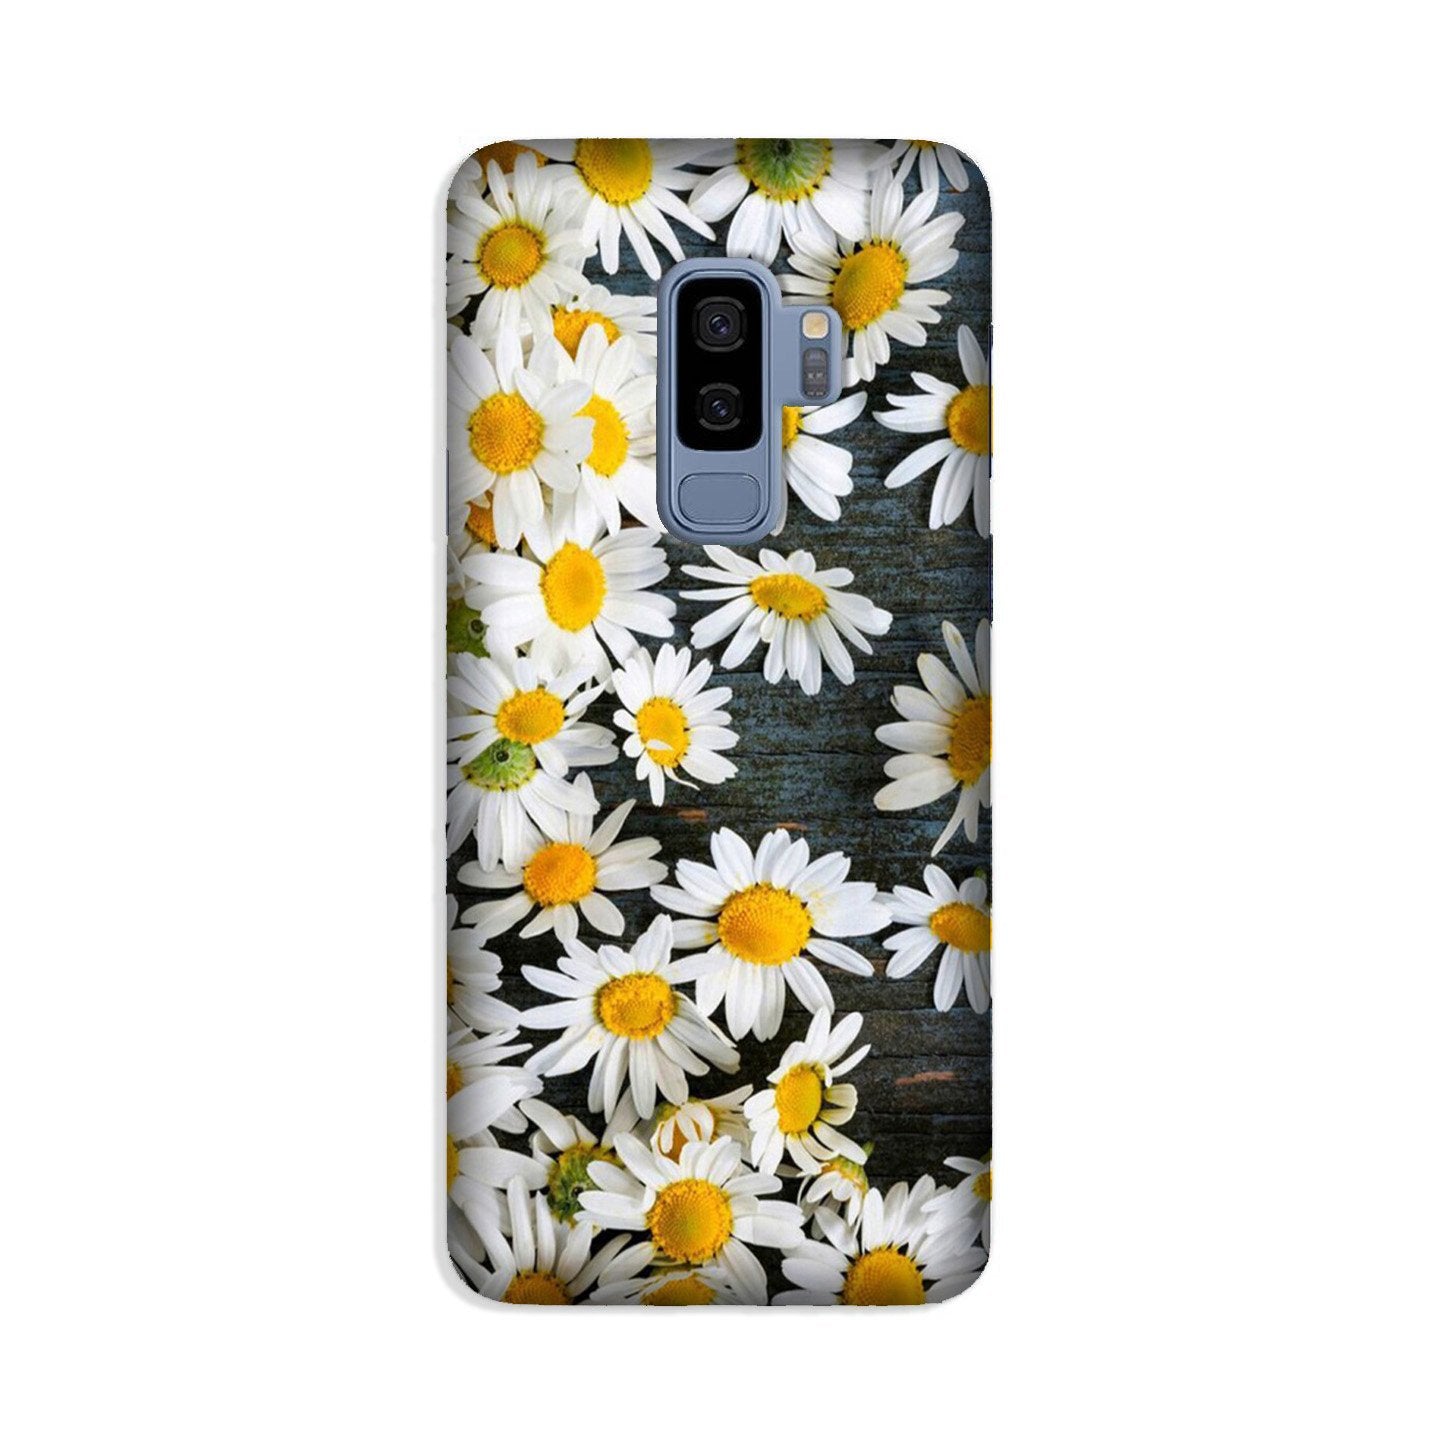 White flowers2 Case for Galaxy S9 Plus